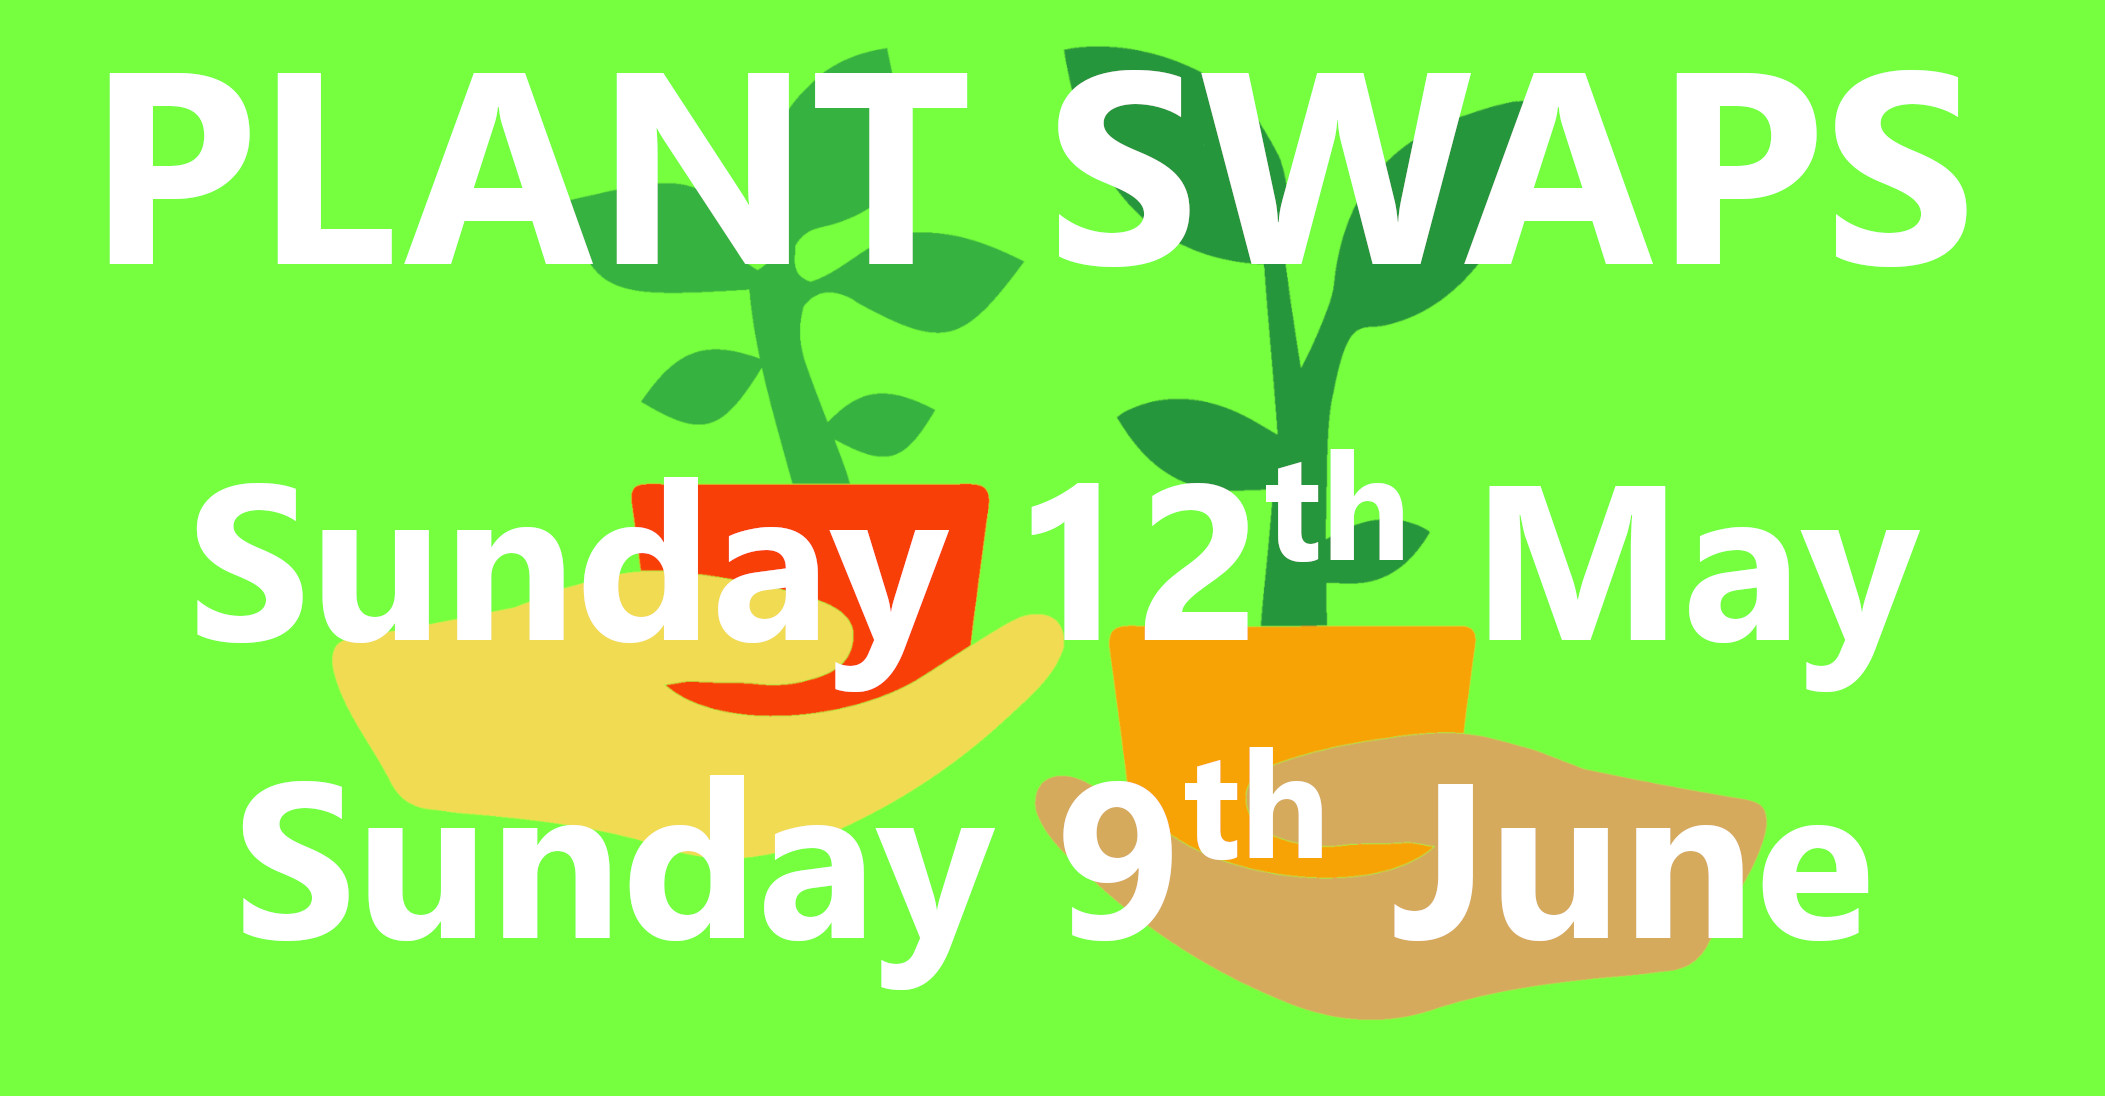 <h2>Plant Swaps</h2><div class='slide-content'><p><span class='highlight'>Swap seedlings and seeds at our public events</span></p></div><a href='/plant-swaps/' class='btn' title='Read more'>Read more</a>